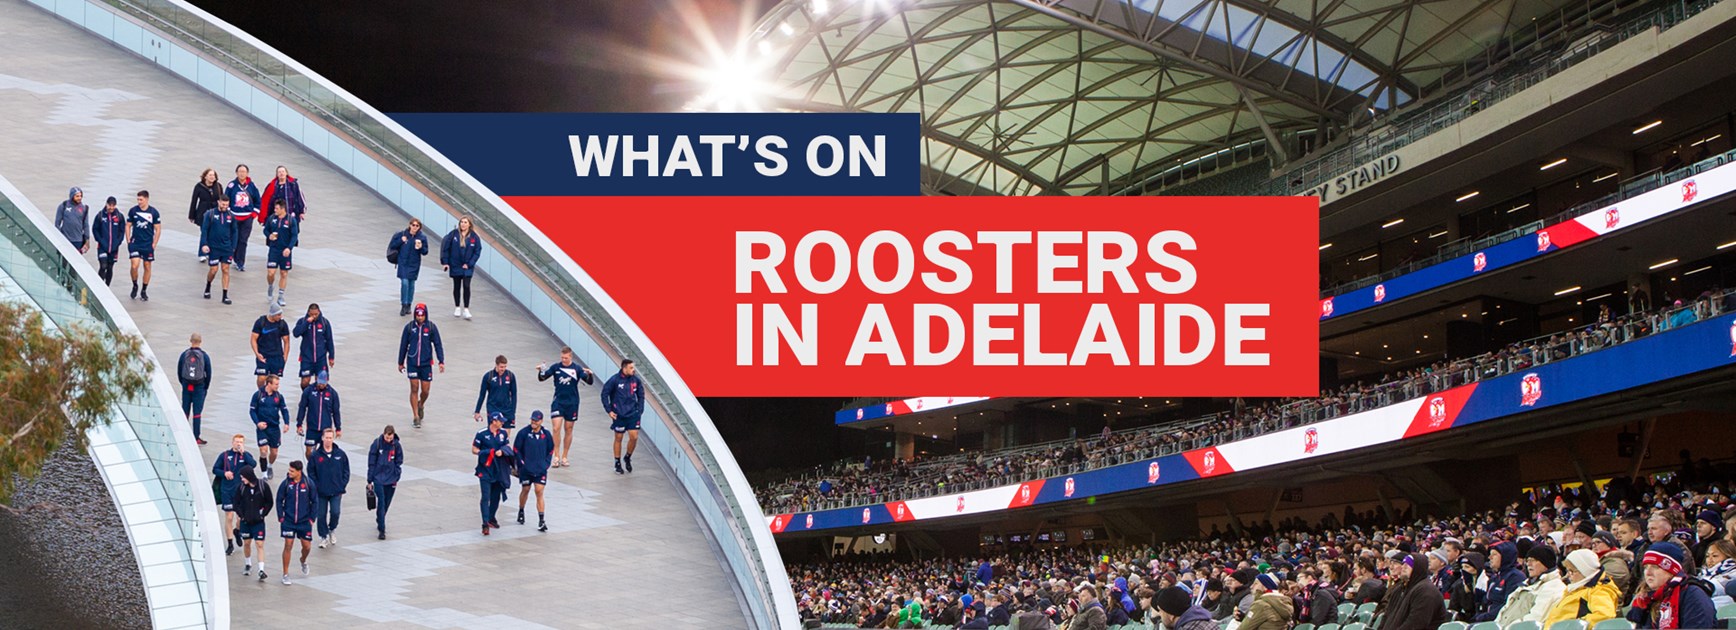 Roosters In Adelaide